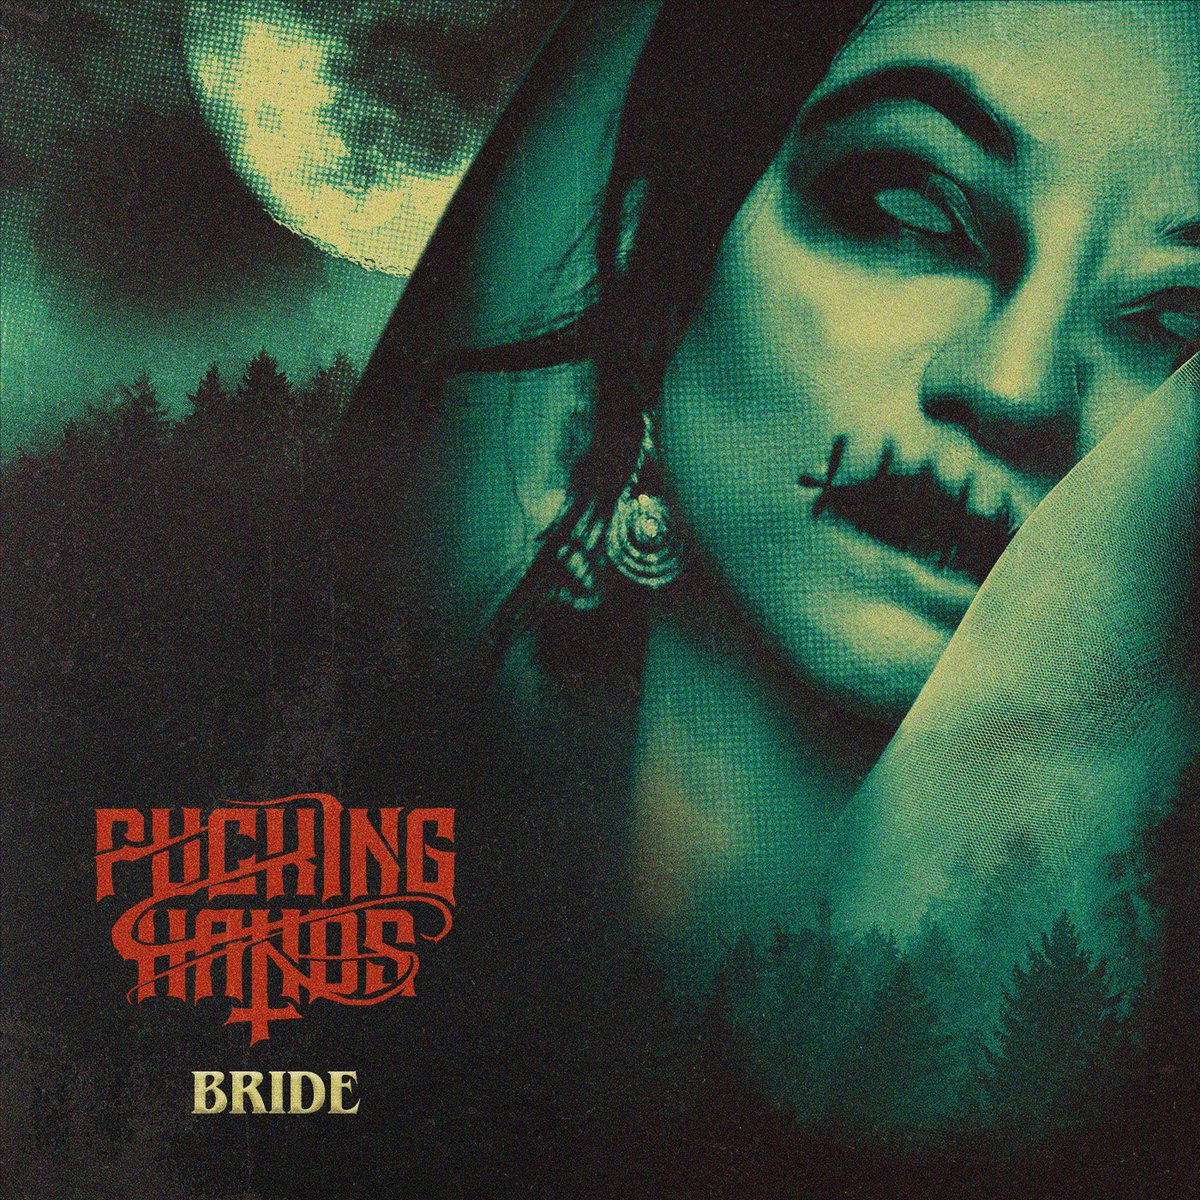 Fucking Hands - Bride (Double Single) 2024 fuckinghands.bandcamp.com/album/bride Fucking Hands is a sludge/doom metal band from Finland. Formed in 2016 in the miserable and dark village of Temmes. They're known for heavy fuzzed out riffs and nihilistic doomy lyrics. ¨